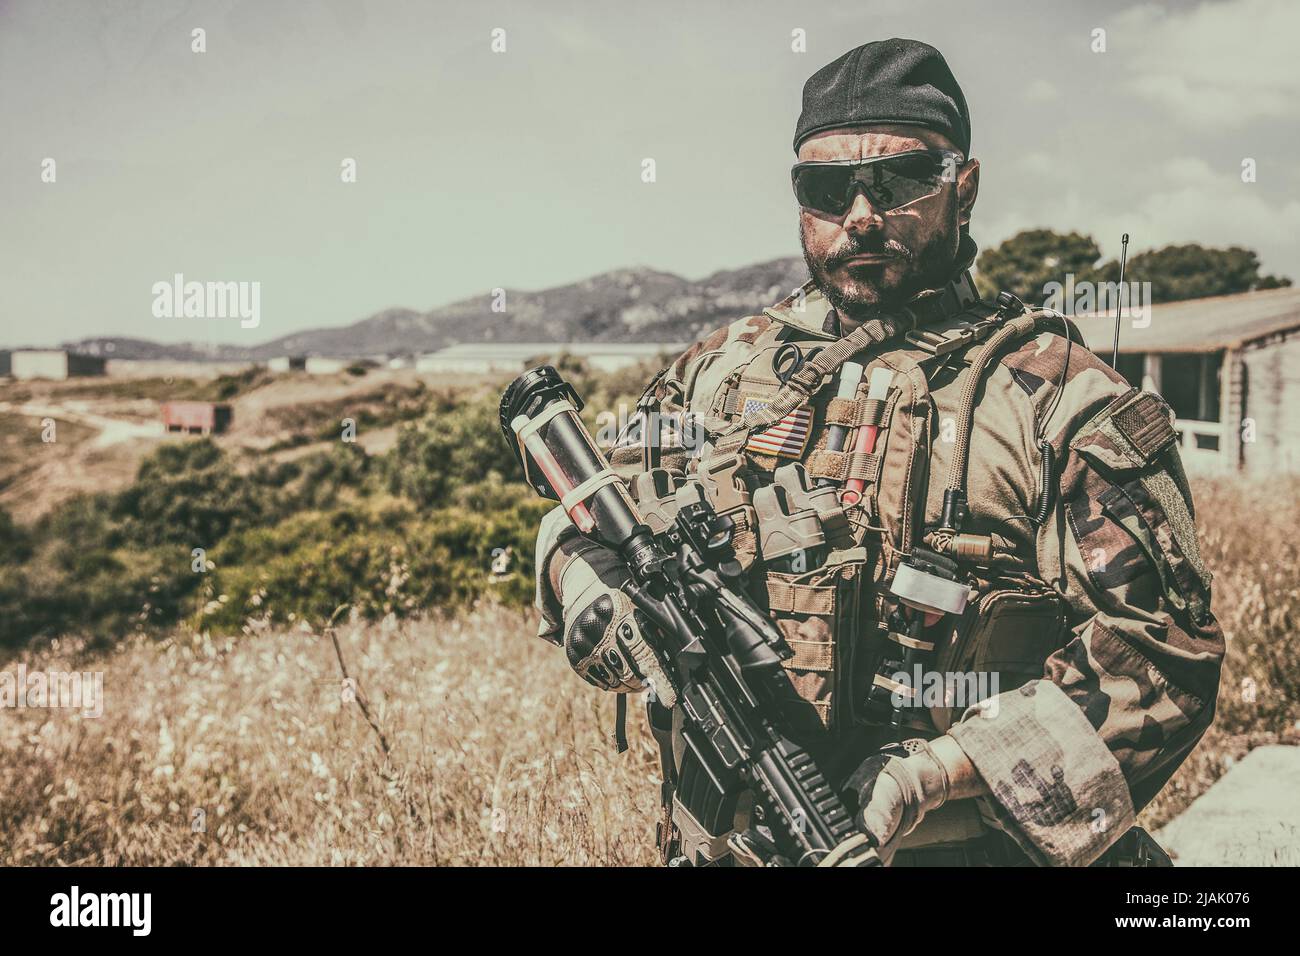 Half-length portrait of an armed Navy SEALs fighter wearing ballistic goggles while standing outdoors. Stock Photo